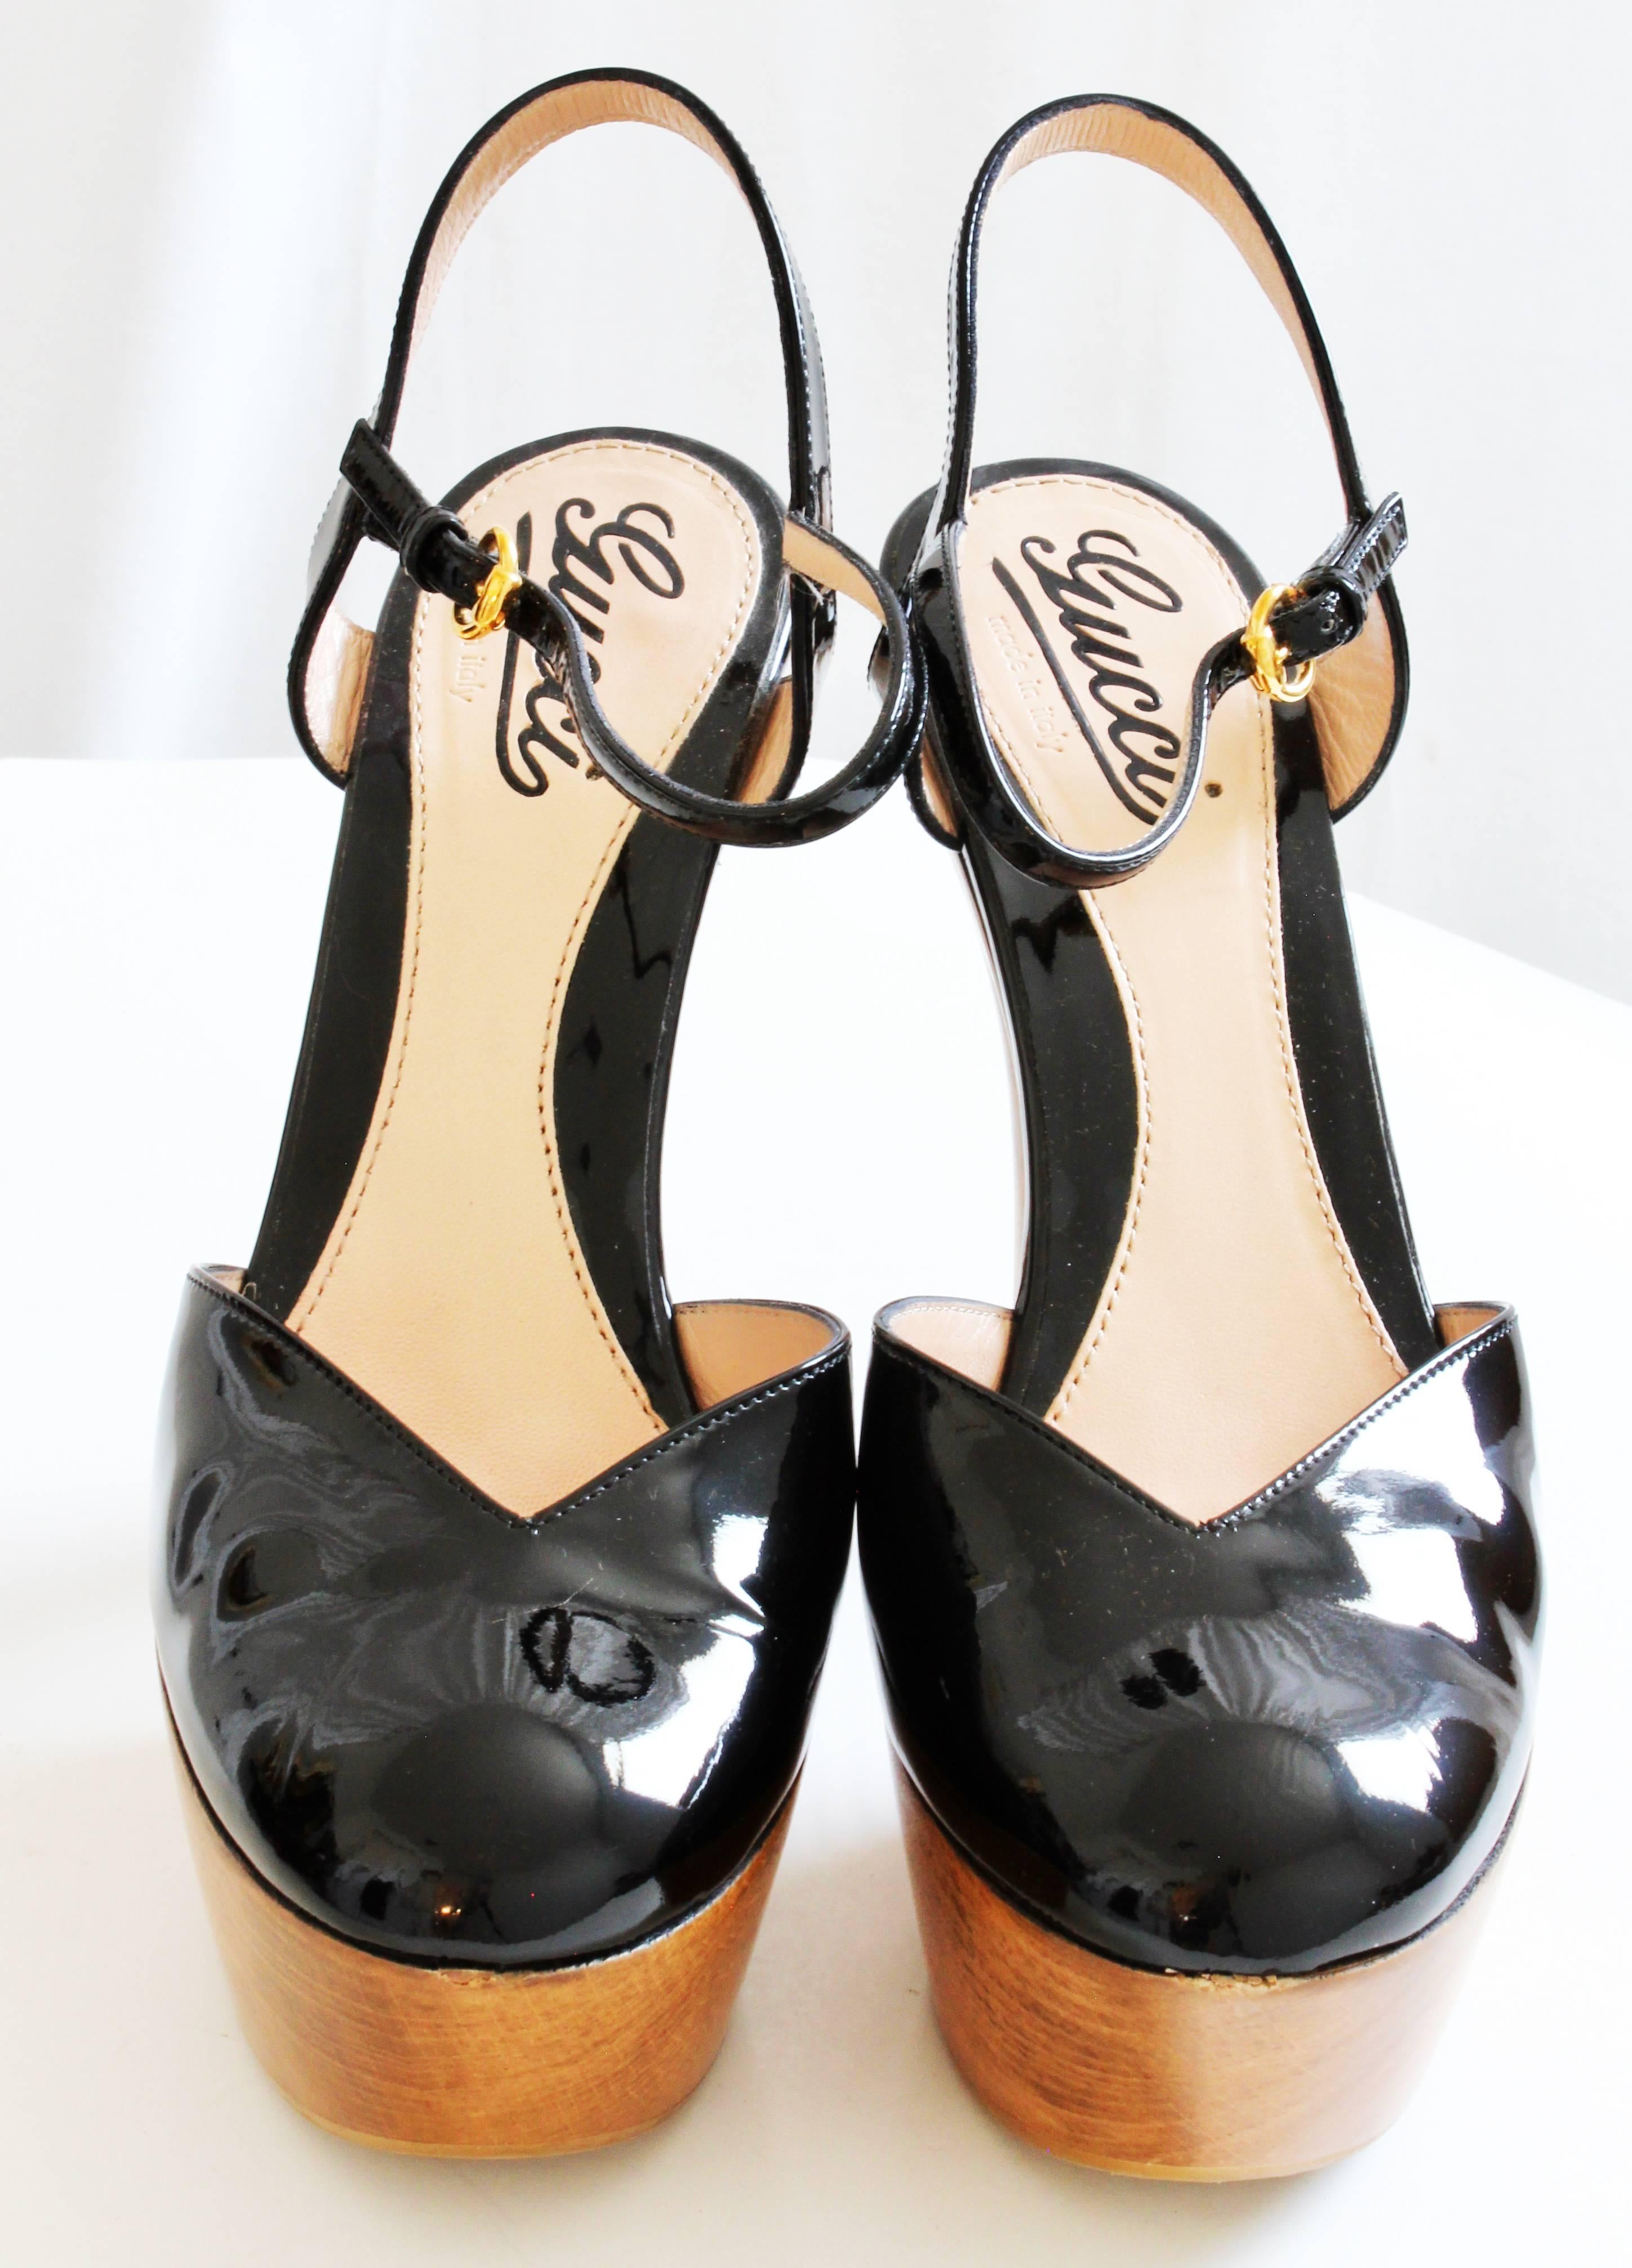 Gucci Platform Shoes Black Patent Leather Ankle Strap Wood Heel in Box sz 38  For Sale 2